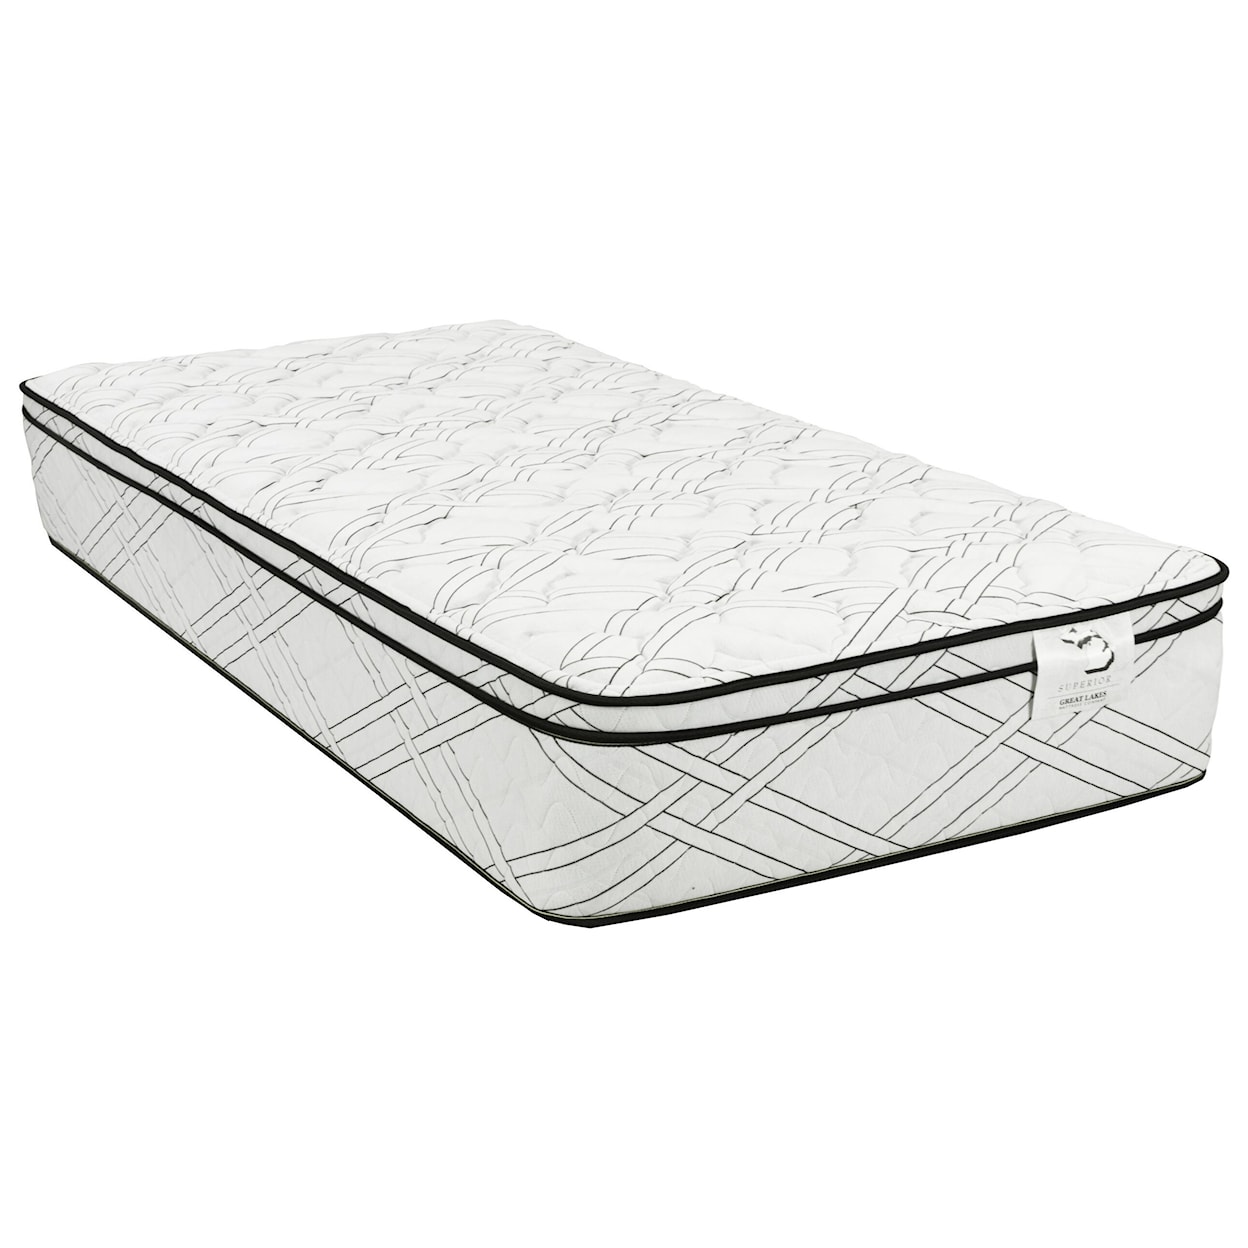 Capitol Bedding Great Lakes Superior Euro Top Queen 11" Euro Top Innerspring Mattress